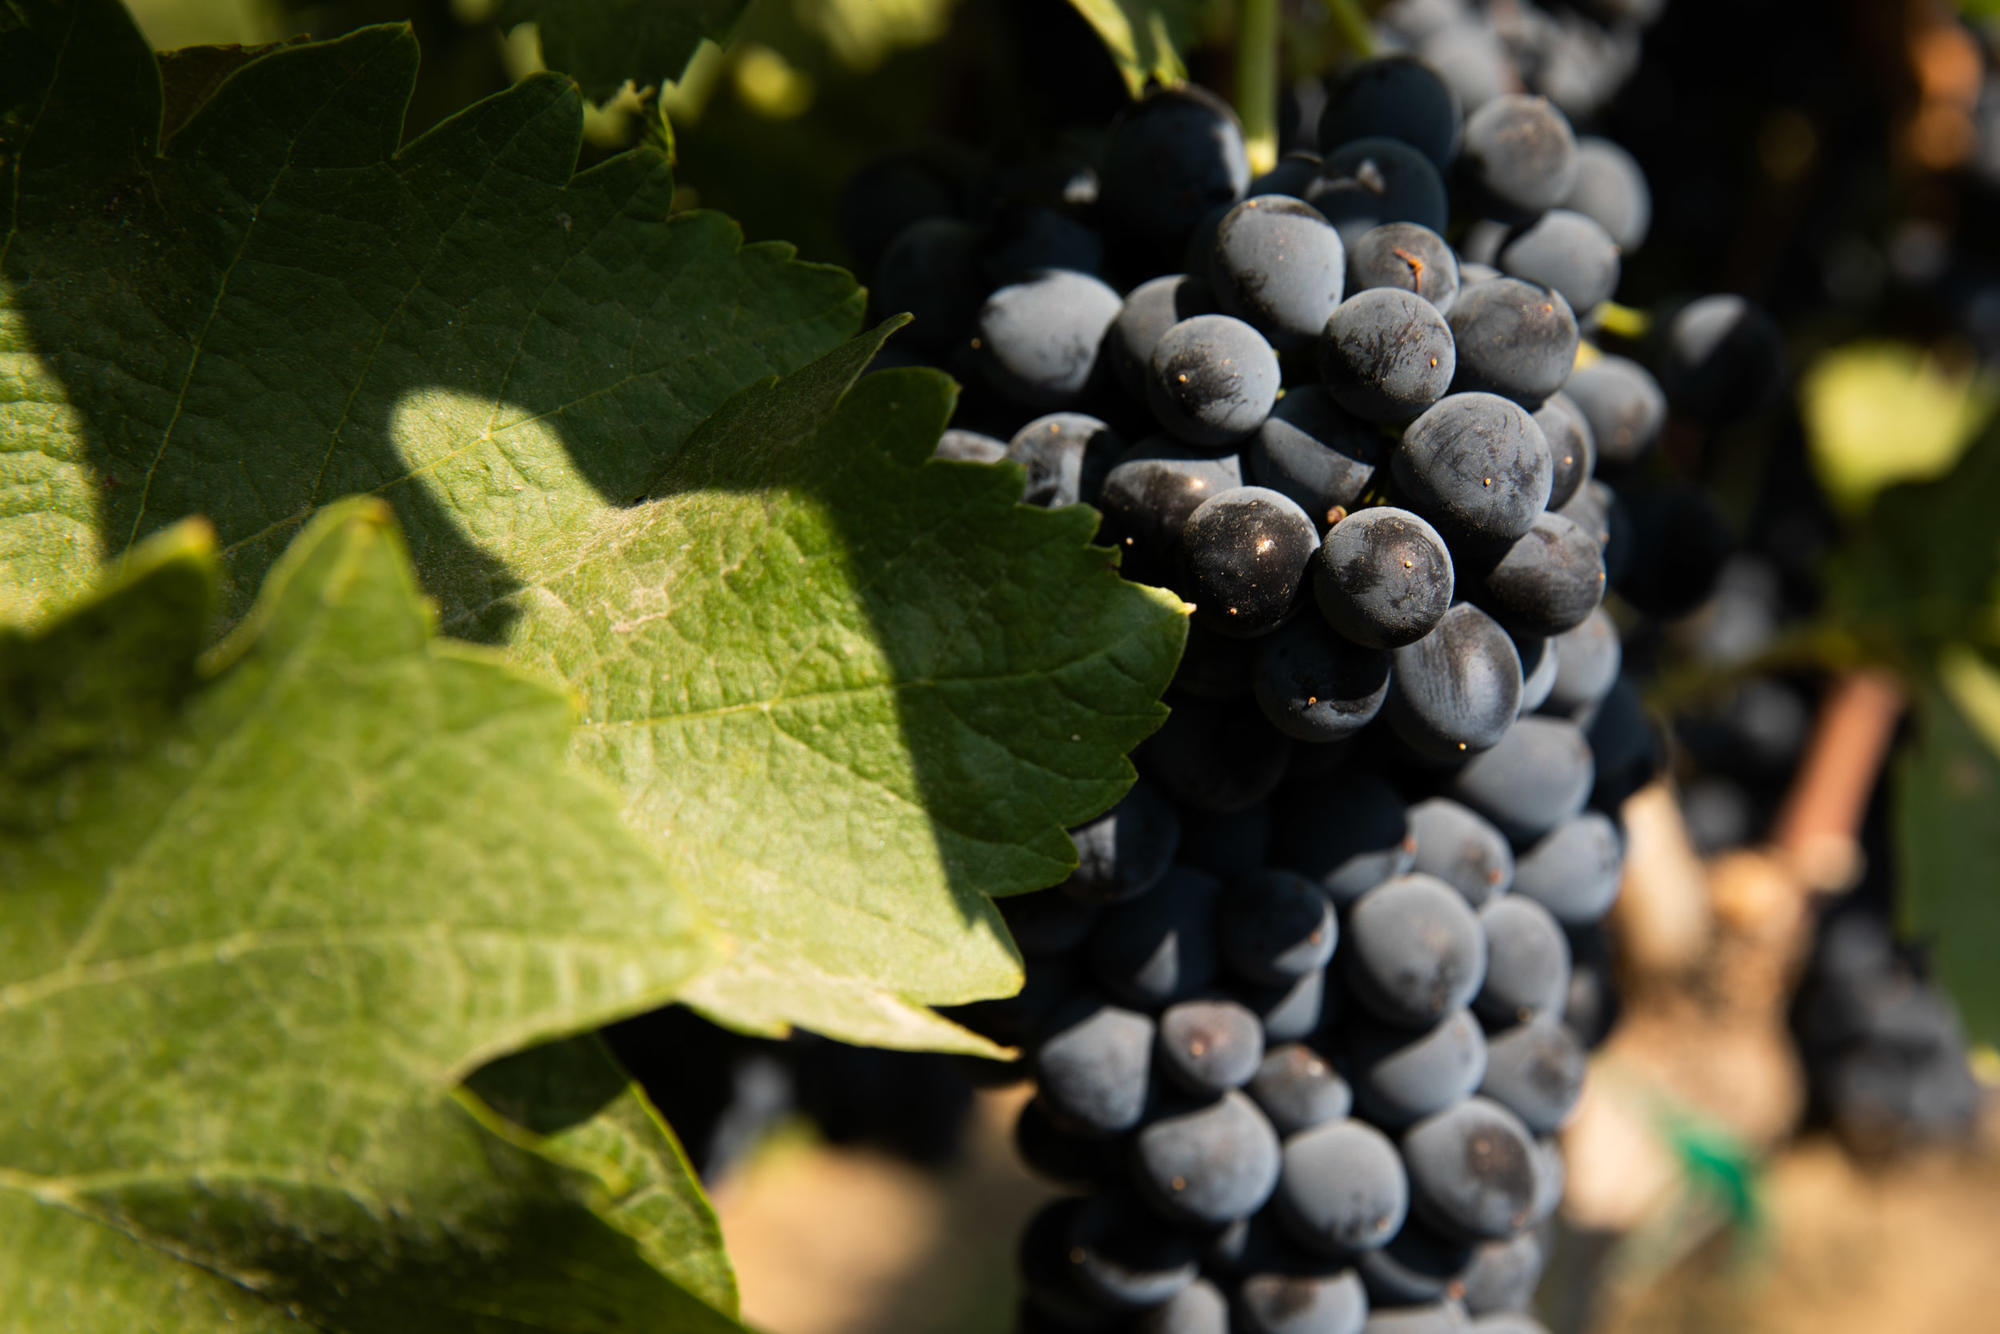 Grapes yet to be harvested at Boushey Vineyards in the Yakima Valley. October 2021